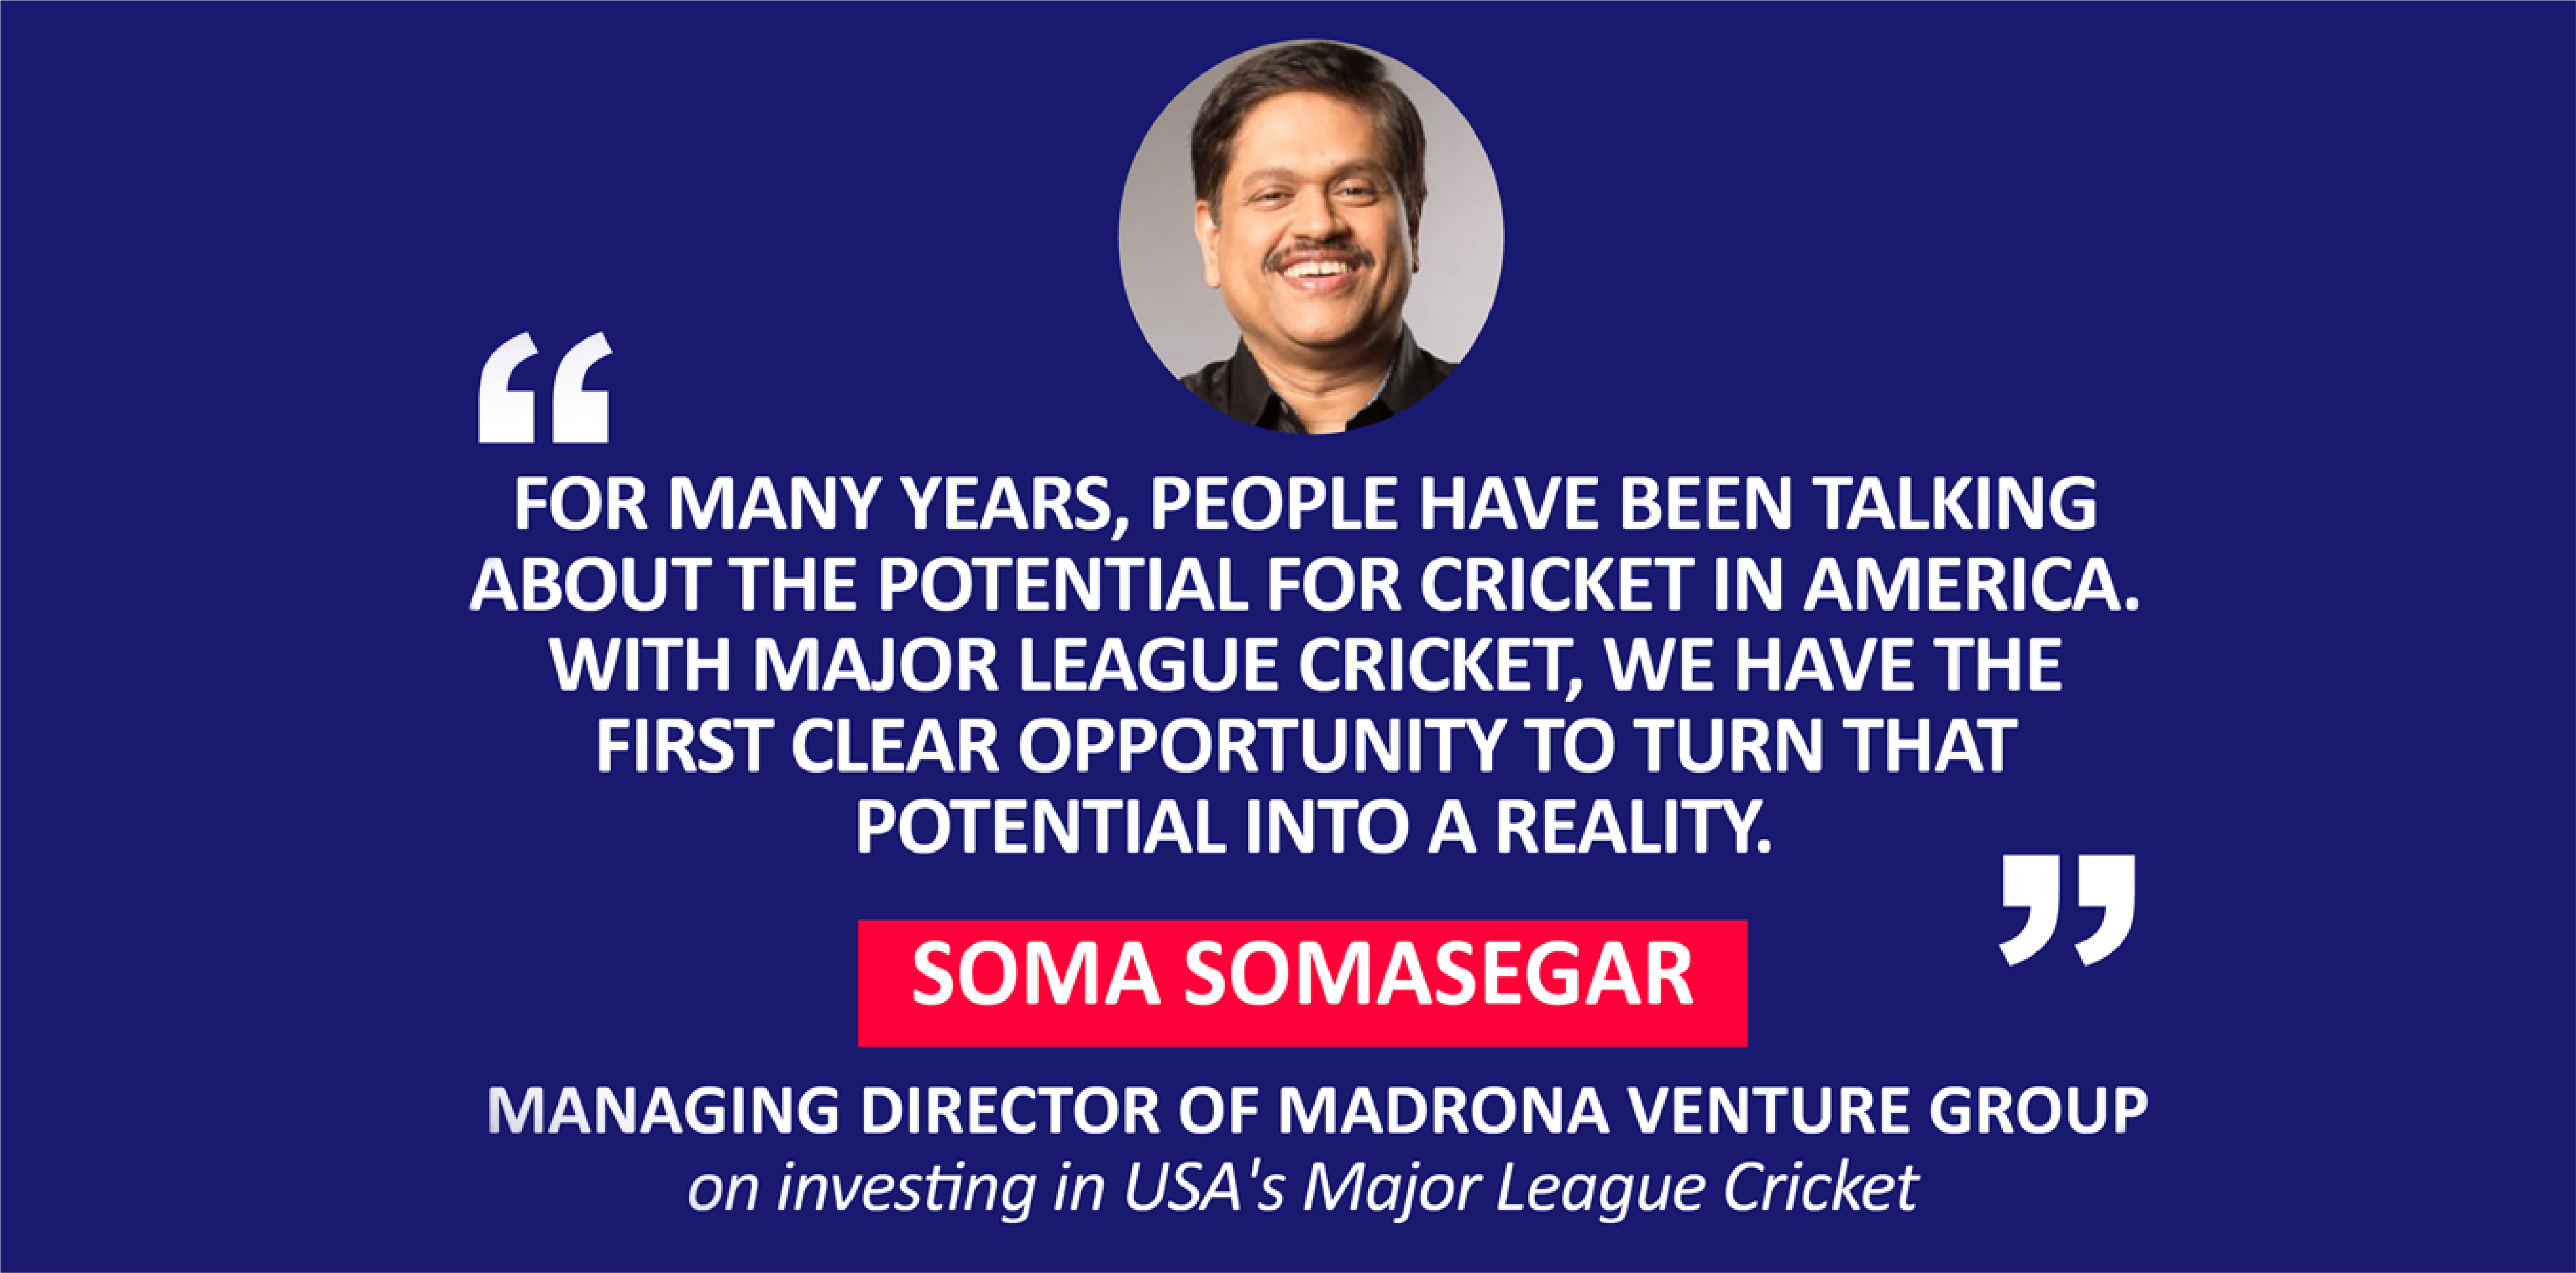 Soma Somasegar, MD of Madrona Venture Group on investing in USA's Major League Cricket